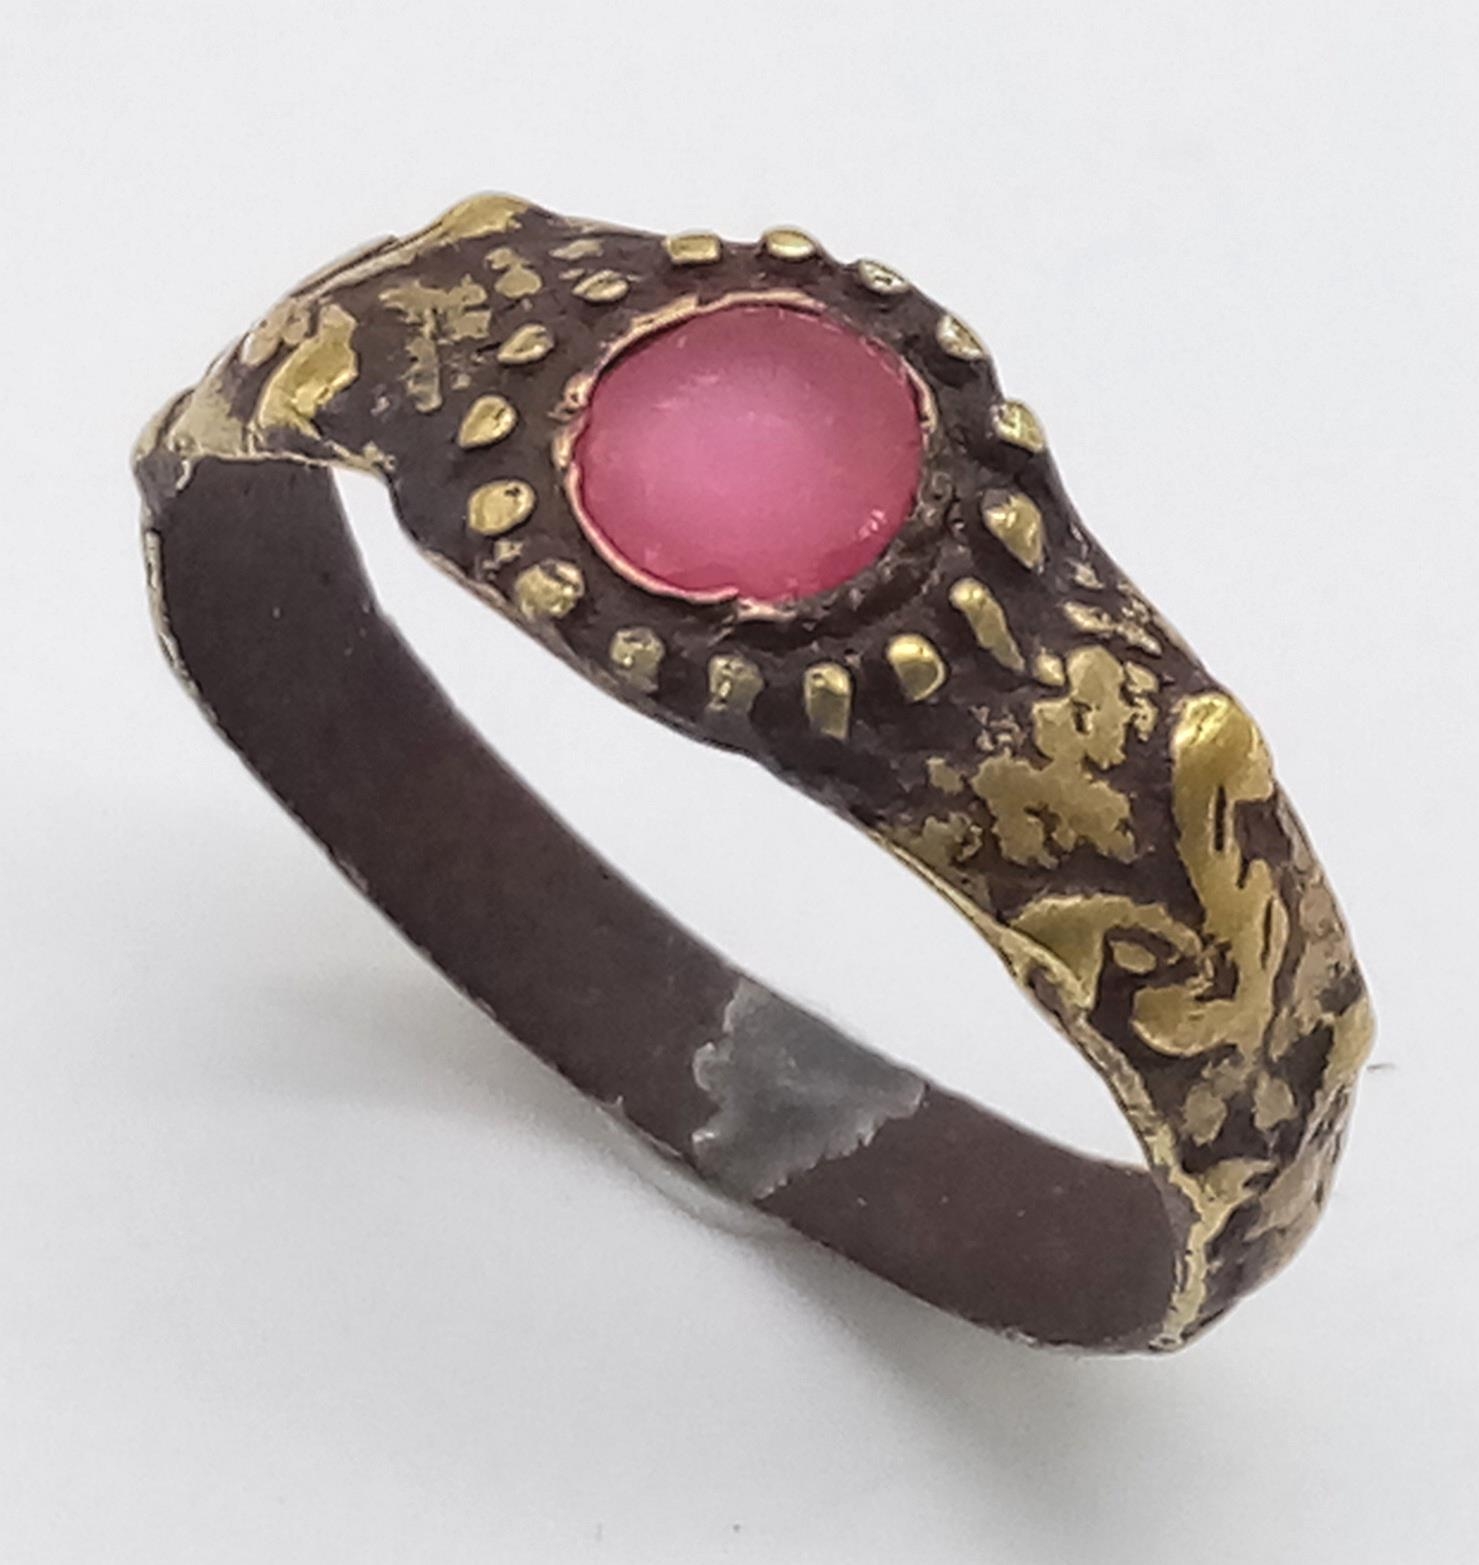 An Antique High-Grade Gold and Ruby Ring - Possibly 16th Century. Size V. 2.73g total weight.